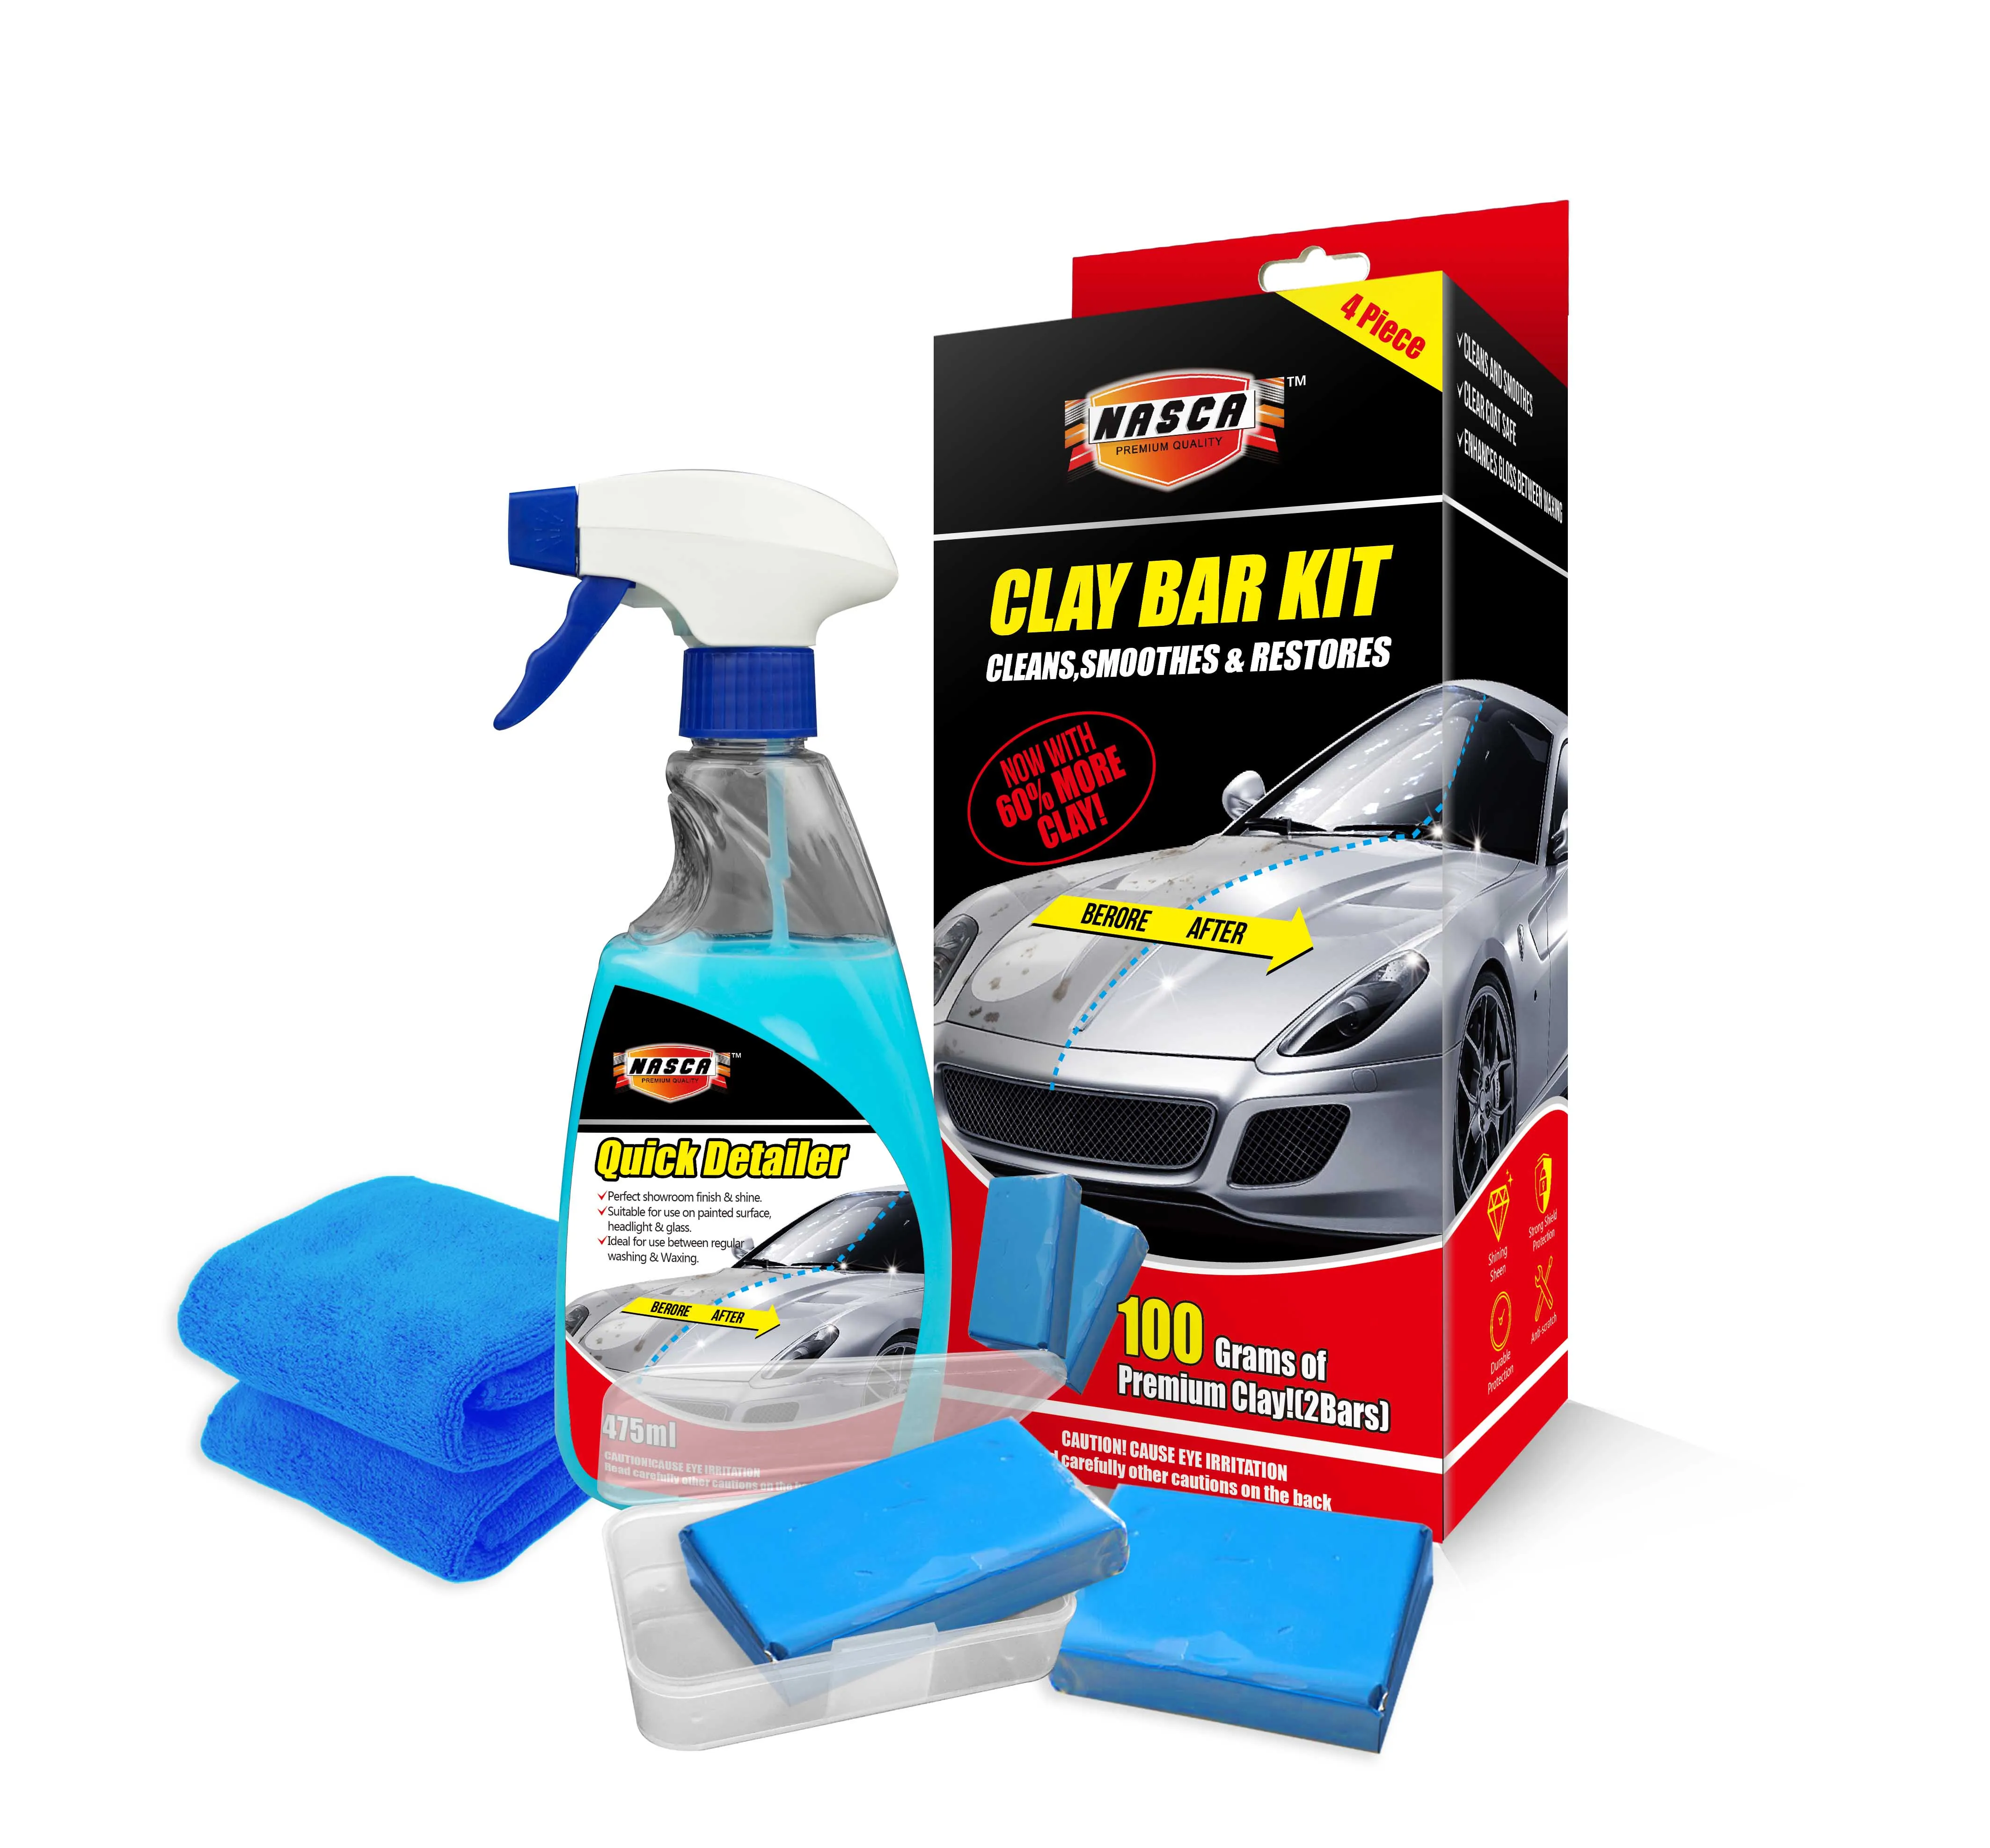 Nasca Clay Bar. All Nasca products available from Economic Motor Spares &  Auto Paints, By Economic Motor Spares & Auto Paints